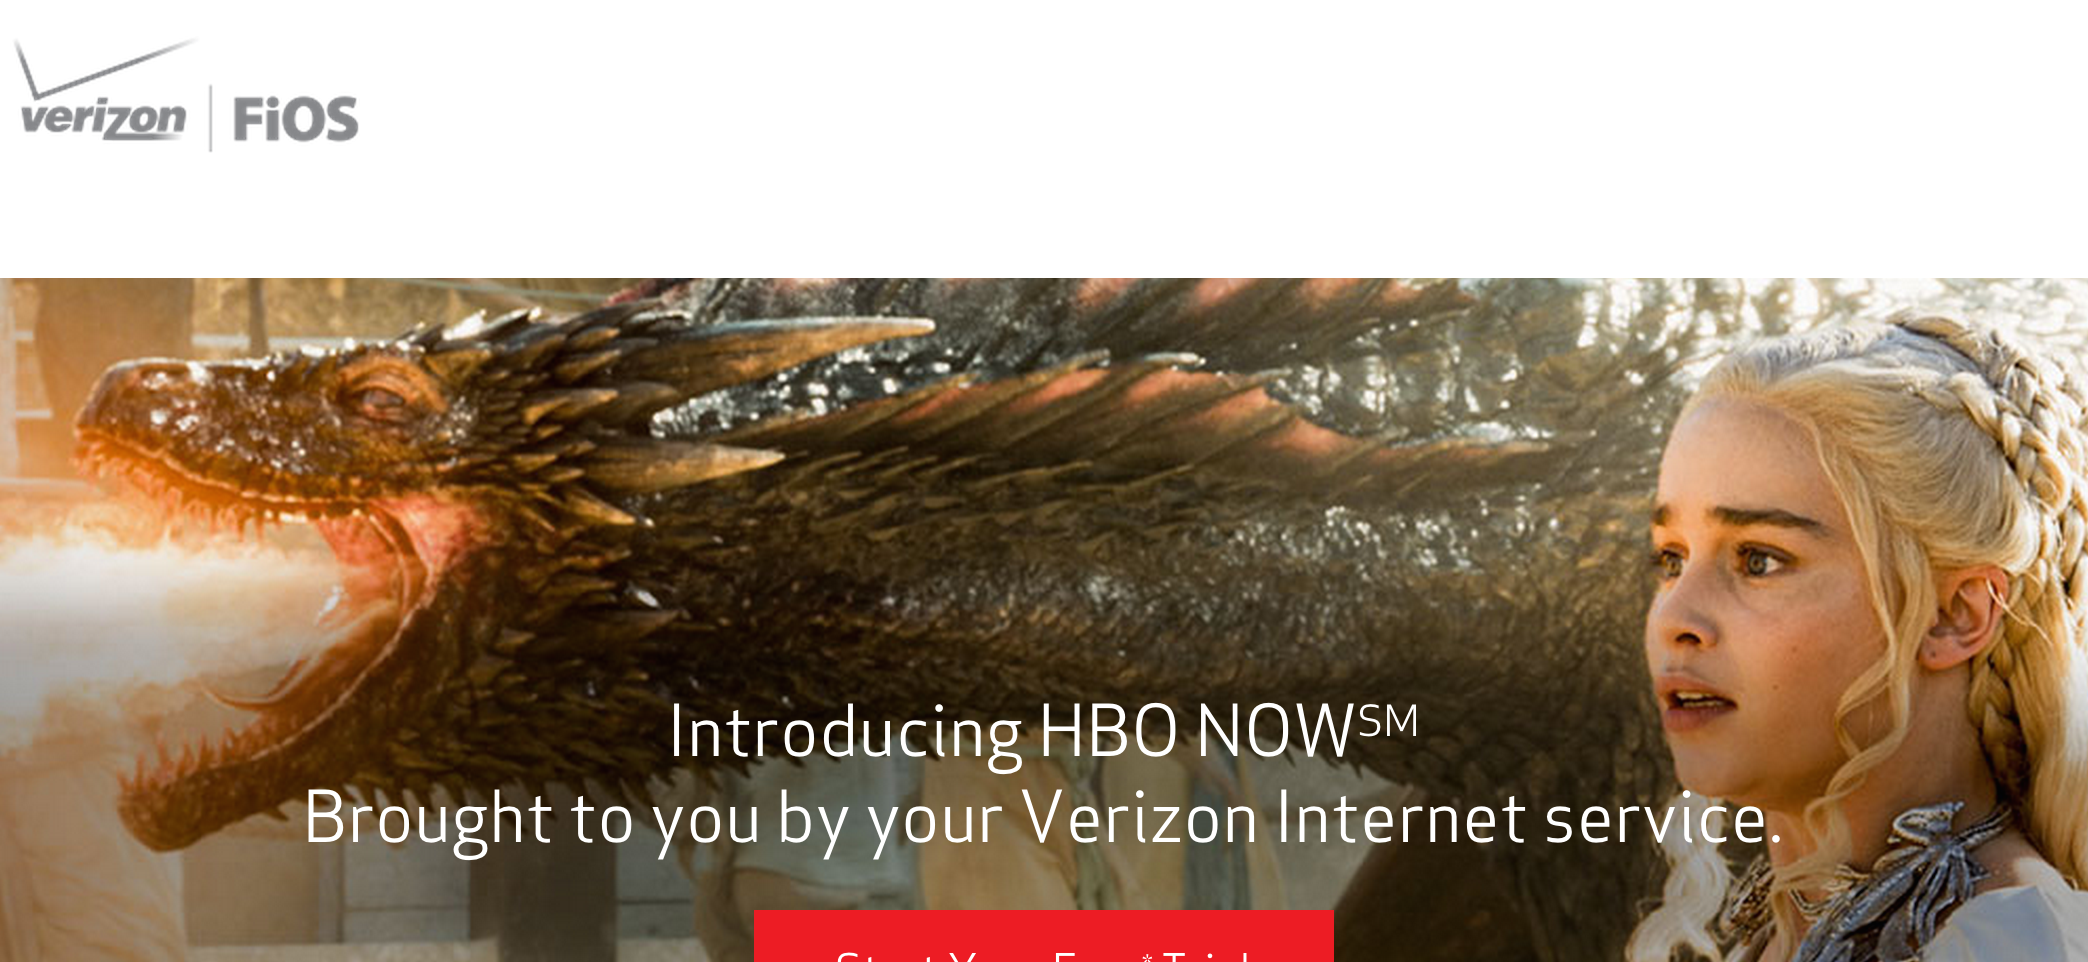 Verizon Makes HBO Now Available To FiOS Customers